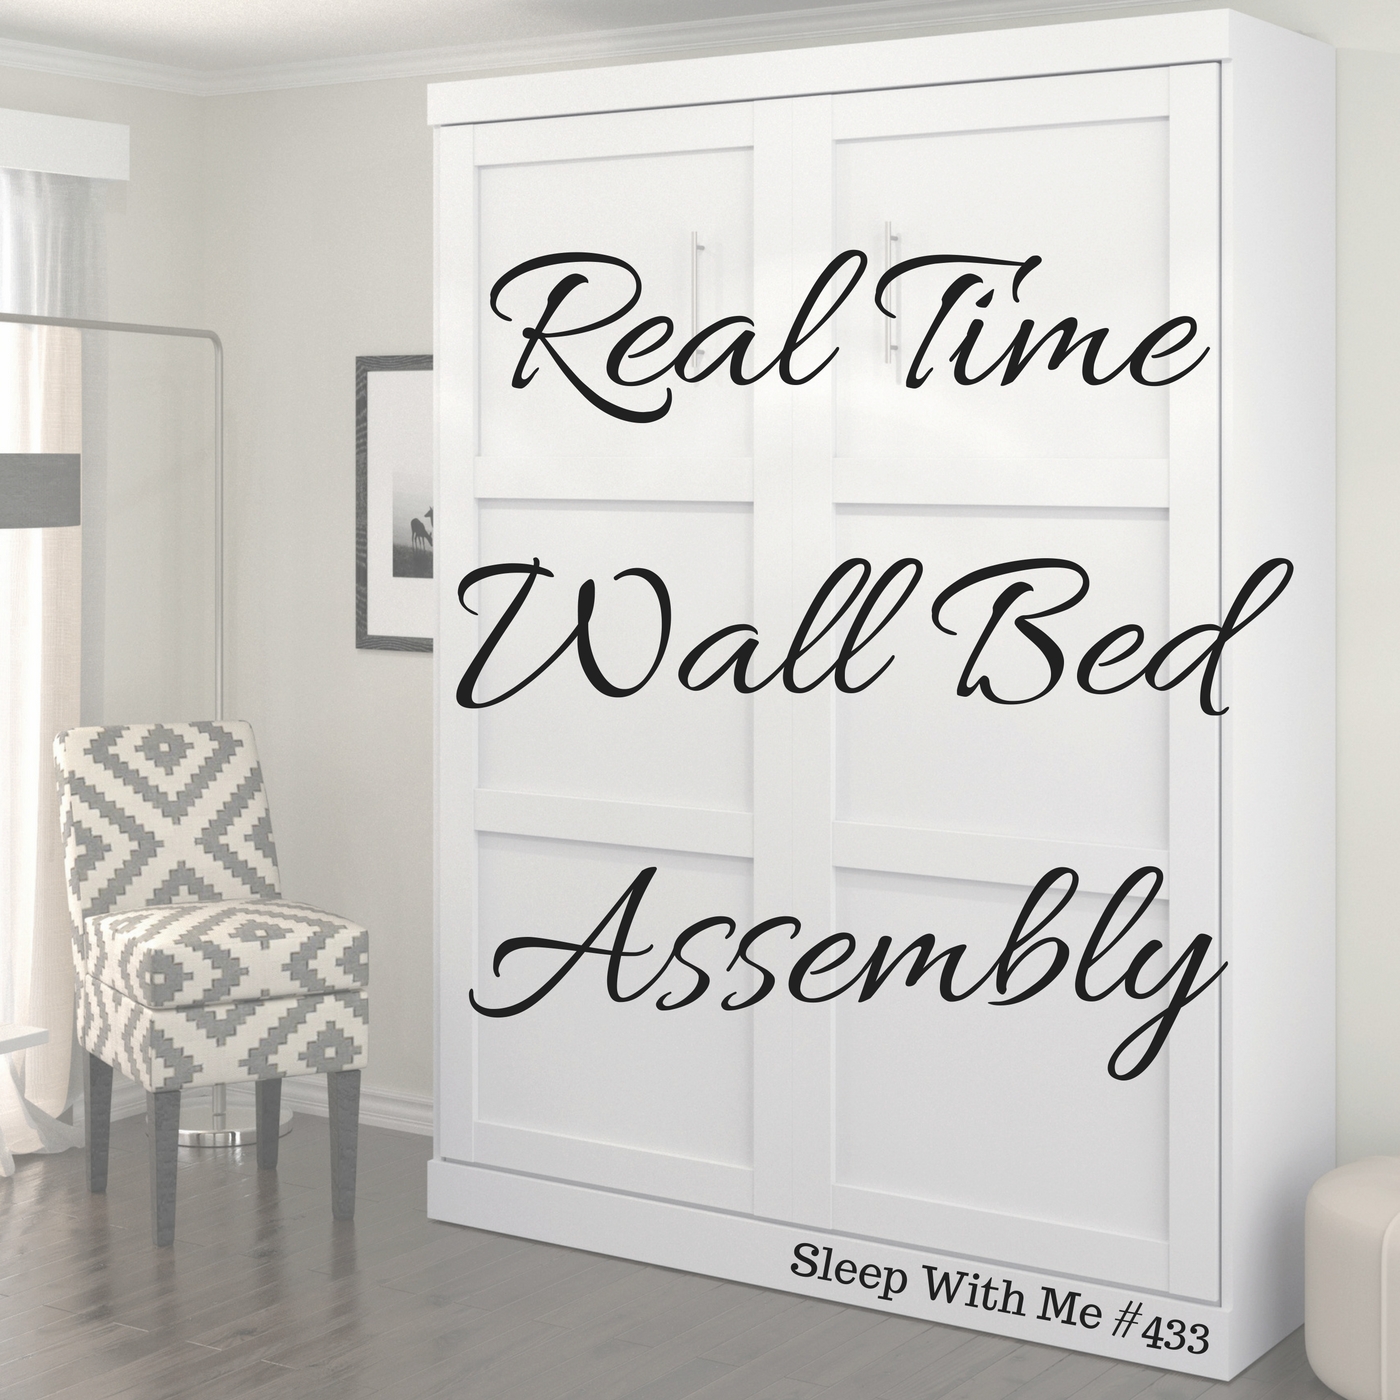 Realtime Wall Bed Assembly | Sleep With Me #433